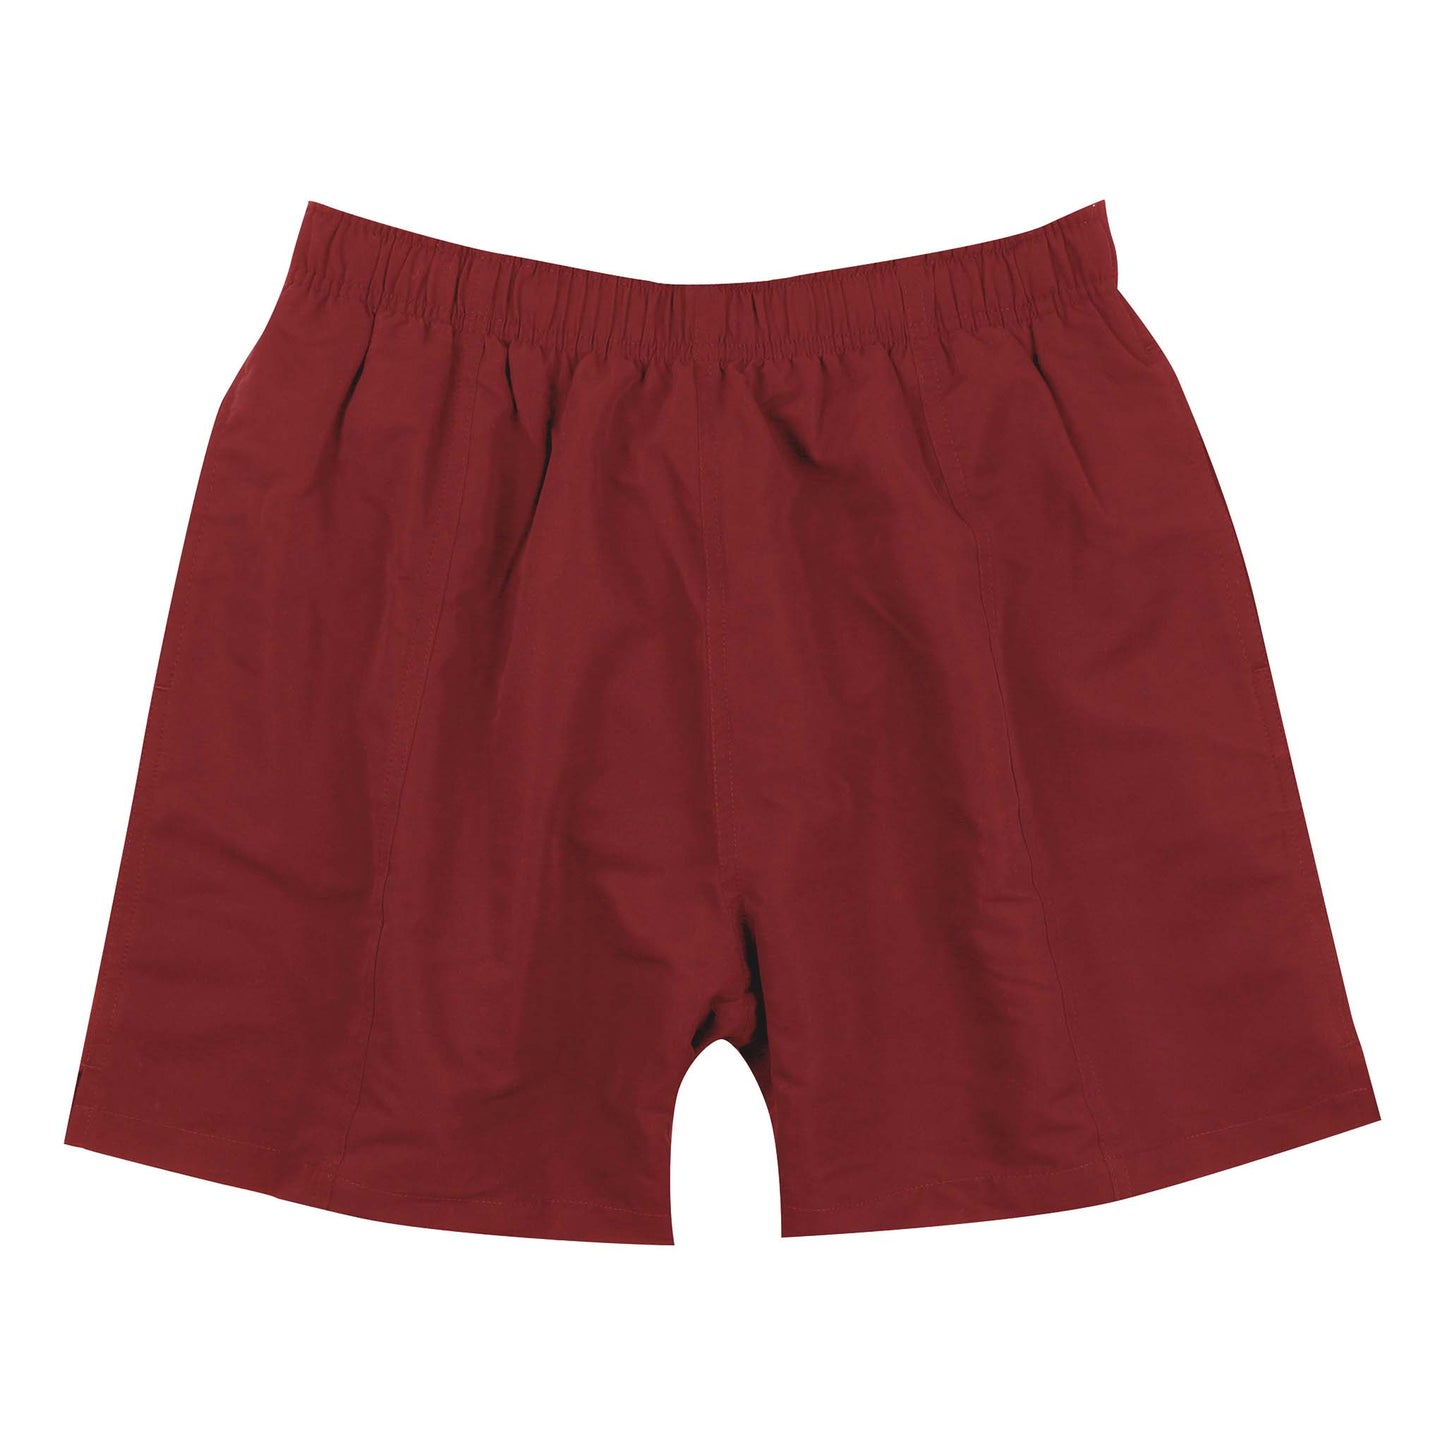 Red Boys Swimsuit Shorts